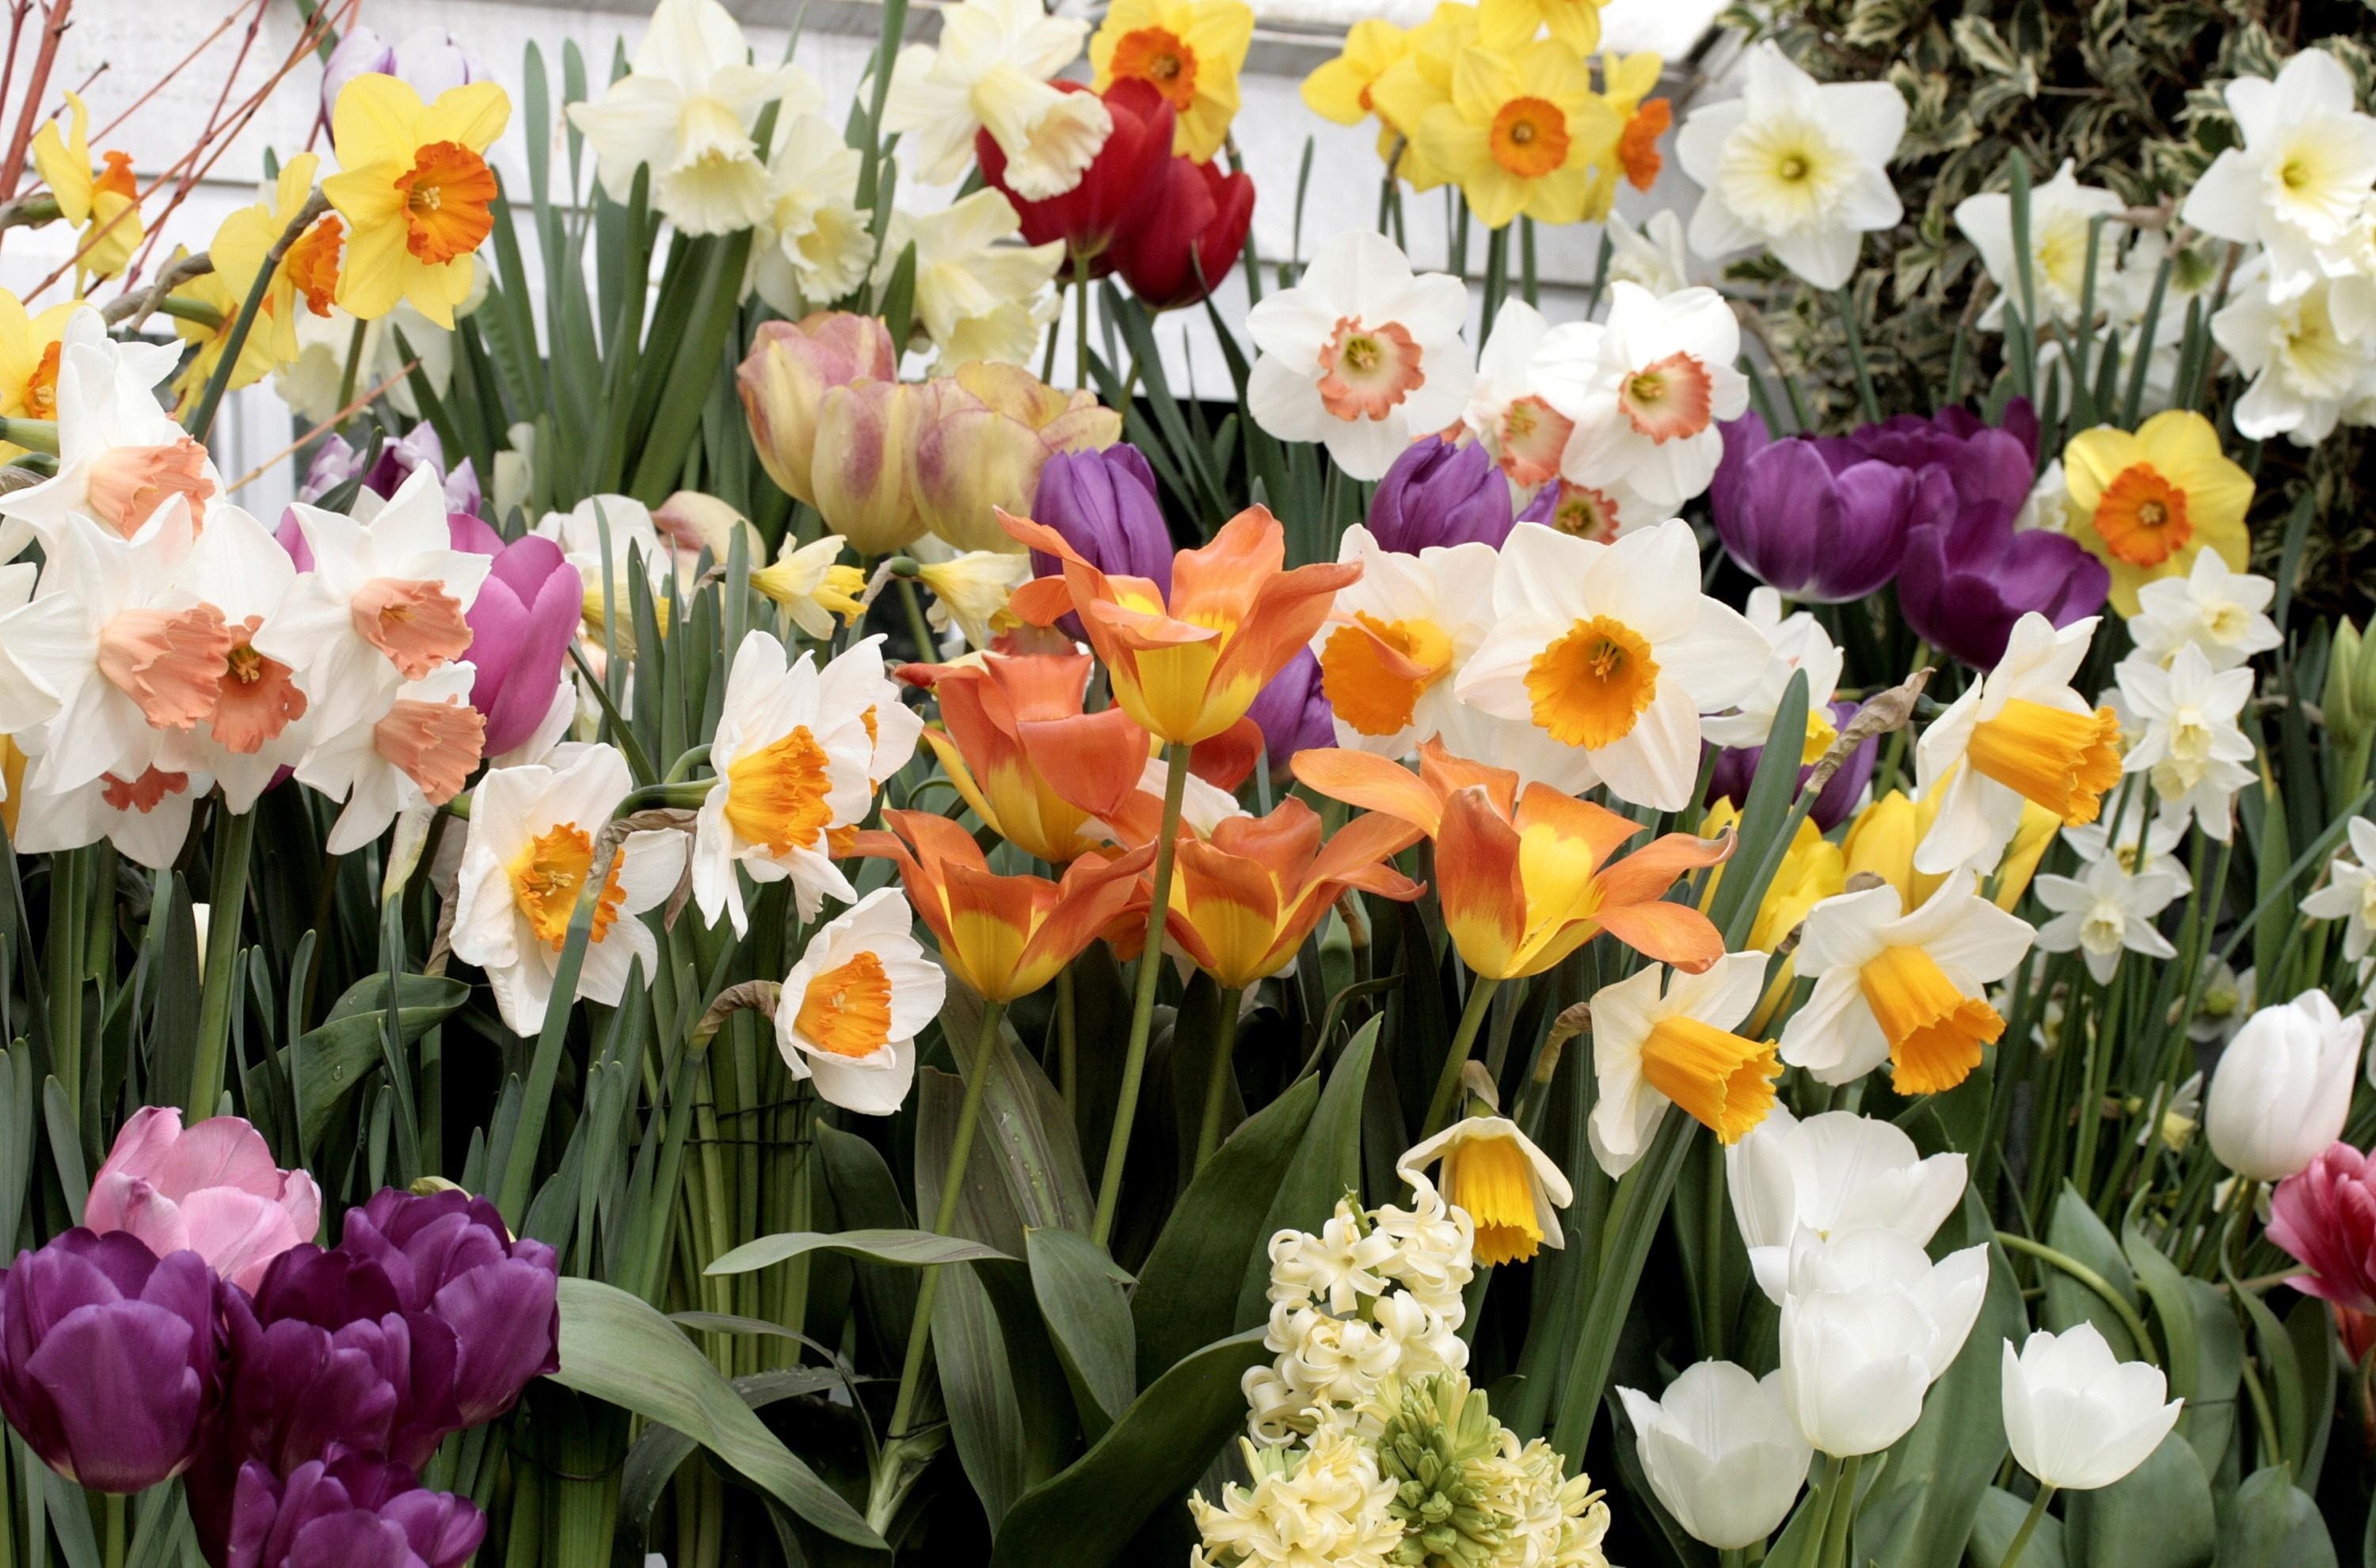 flowers, tulips, narcissussi, hyacinth, flower bed, flowerbed, lots of, multitude iphone wallpaper